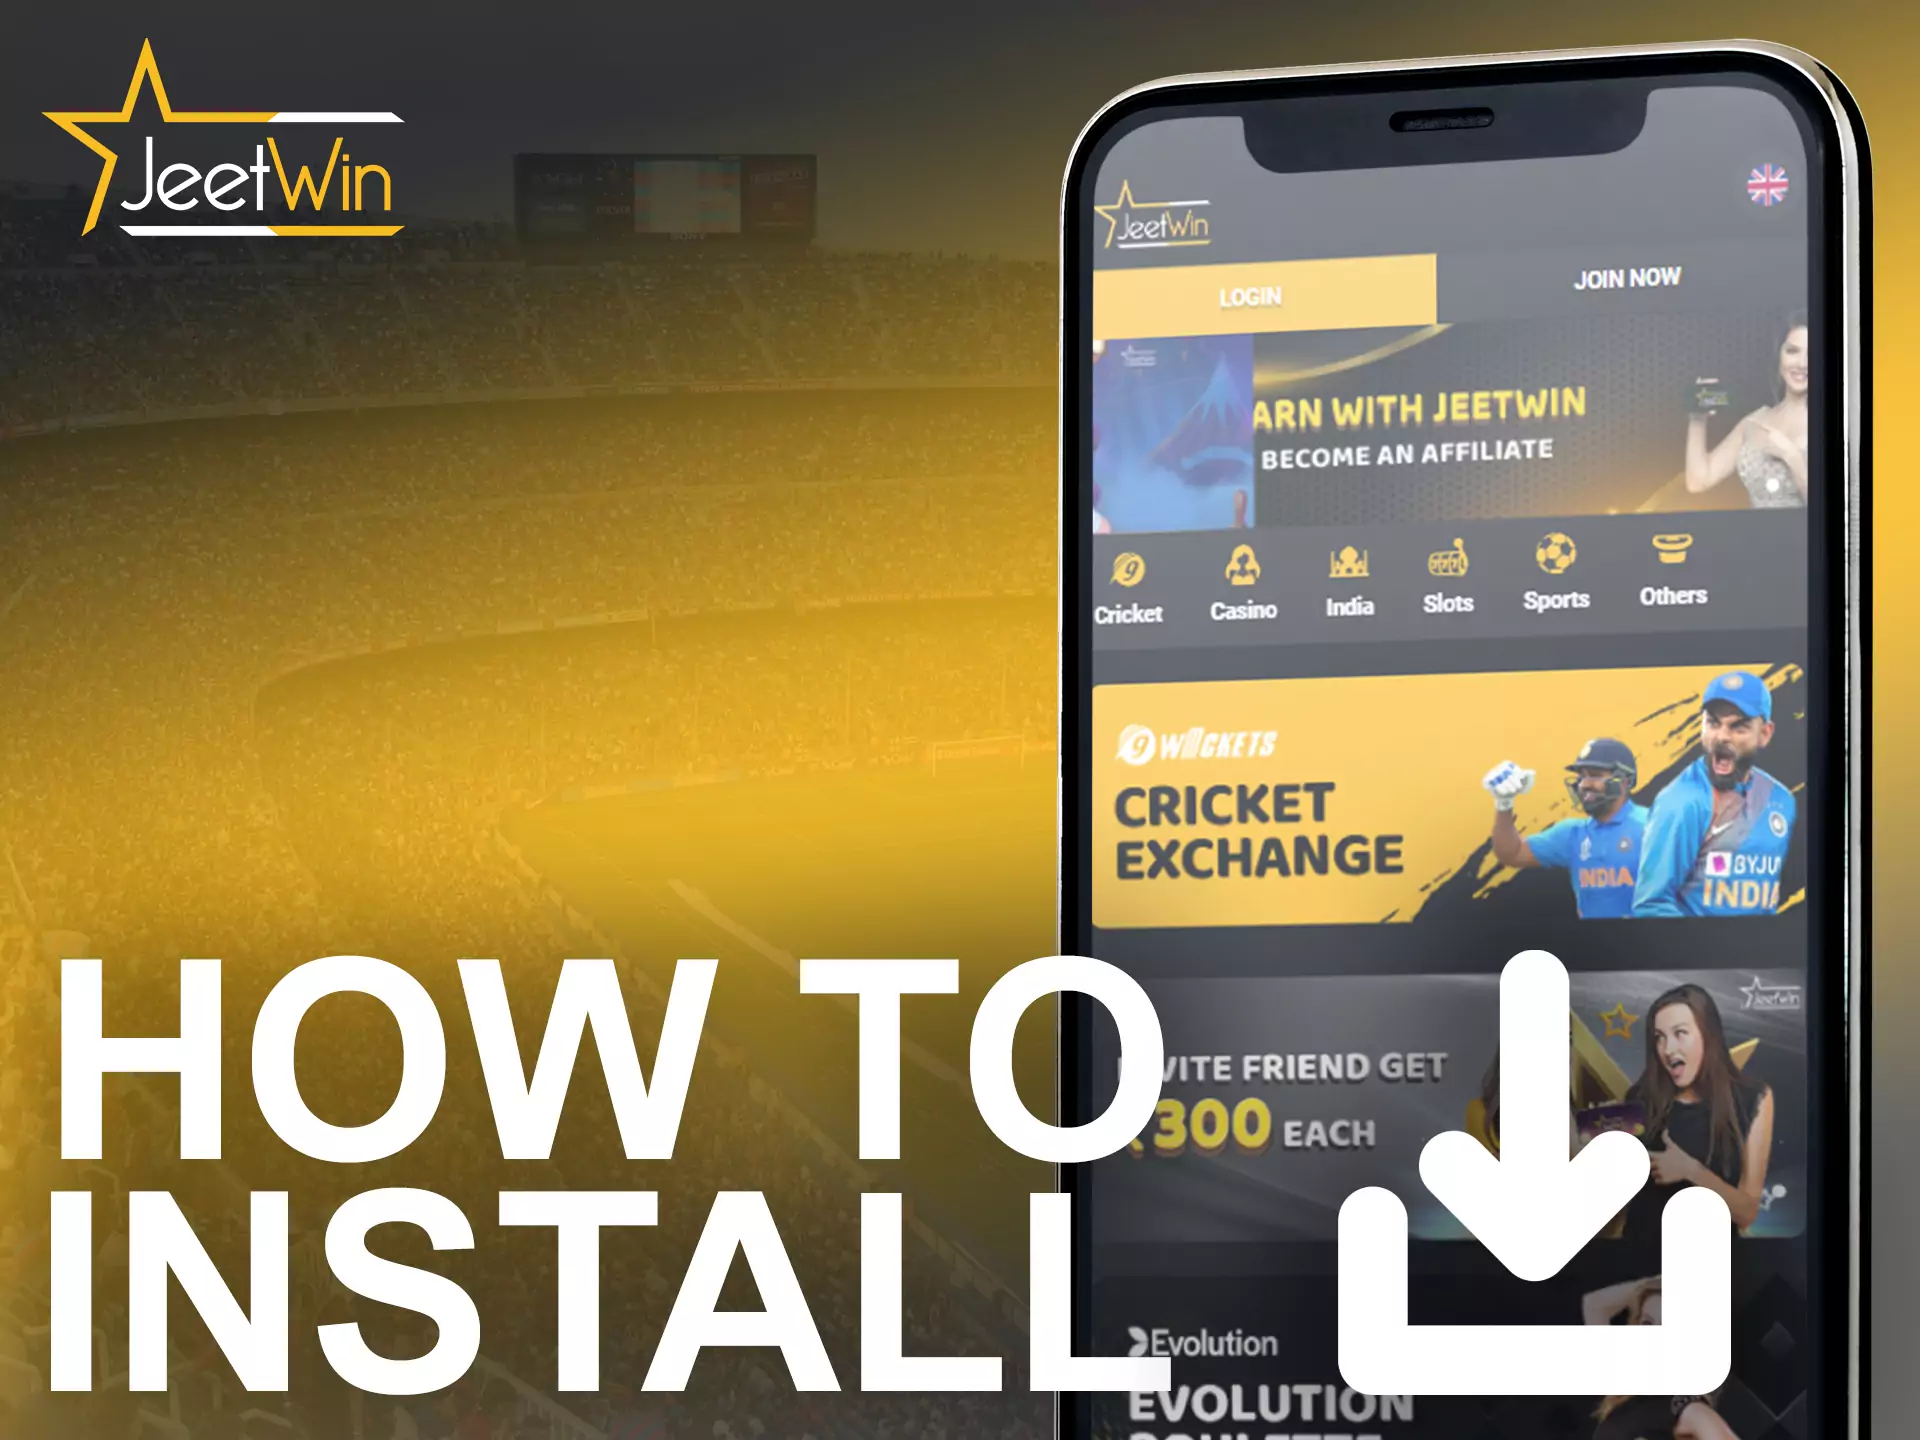 Install the JeetWin mobile app with this instruction easily and quickly.